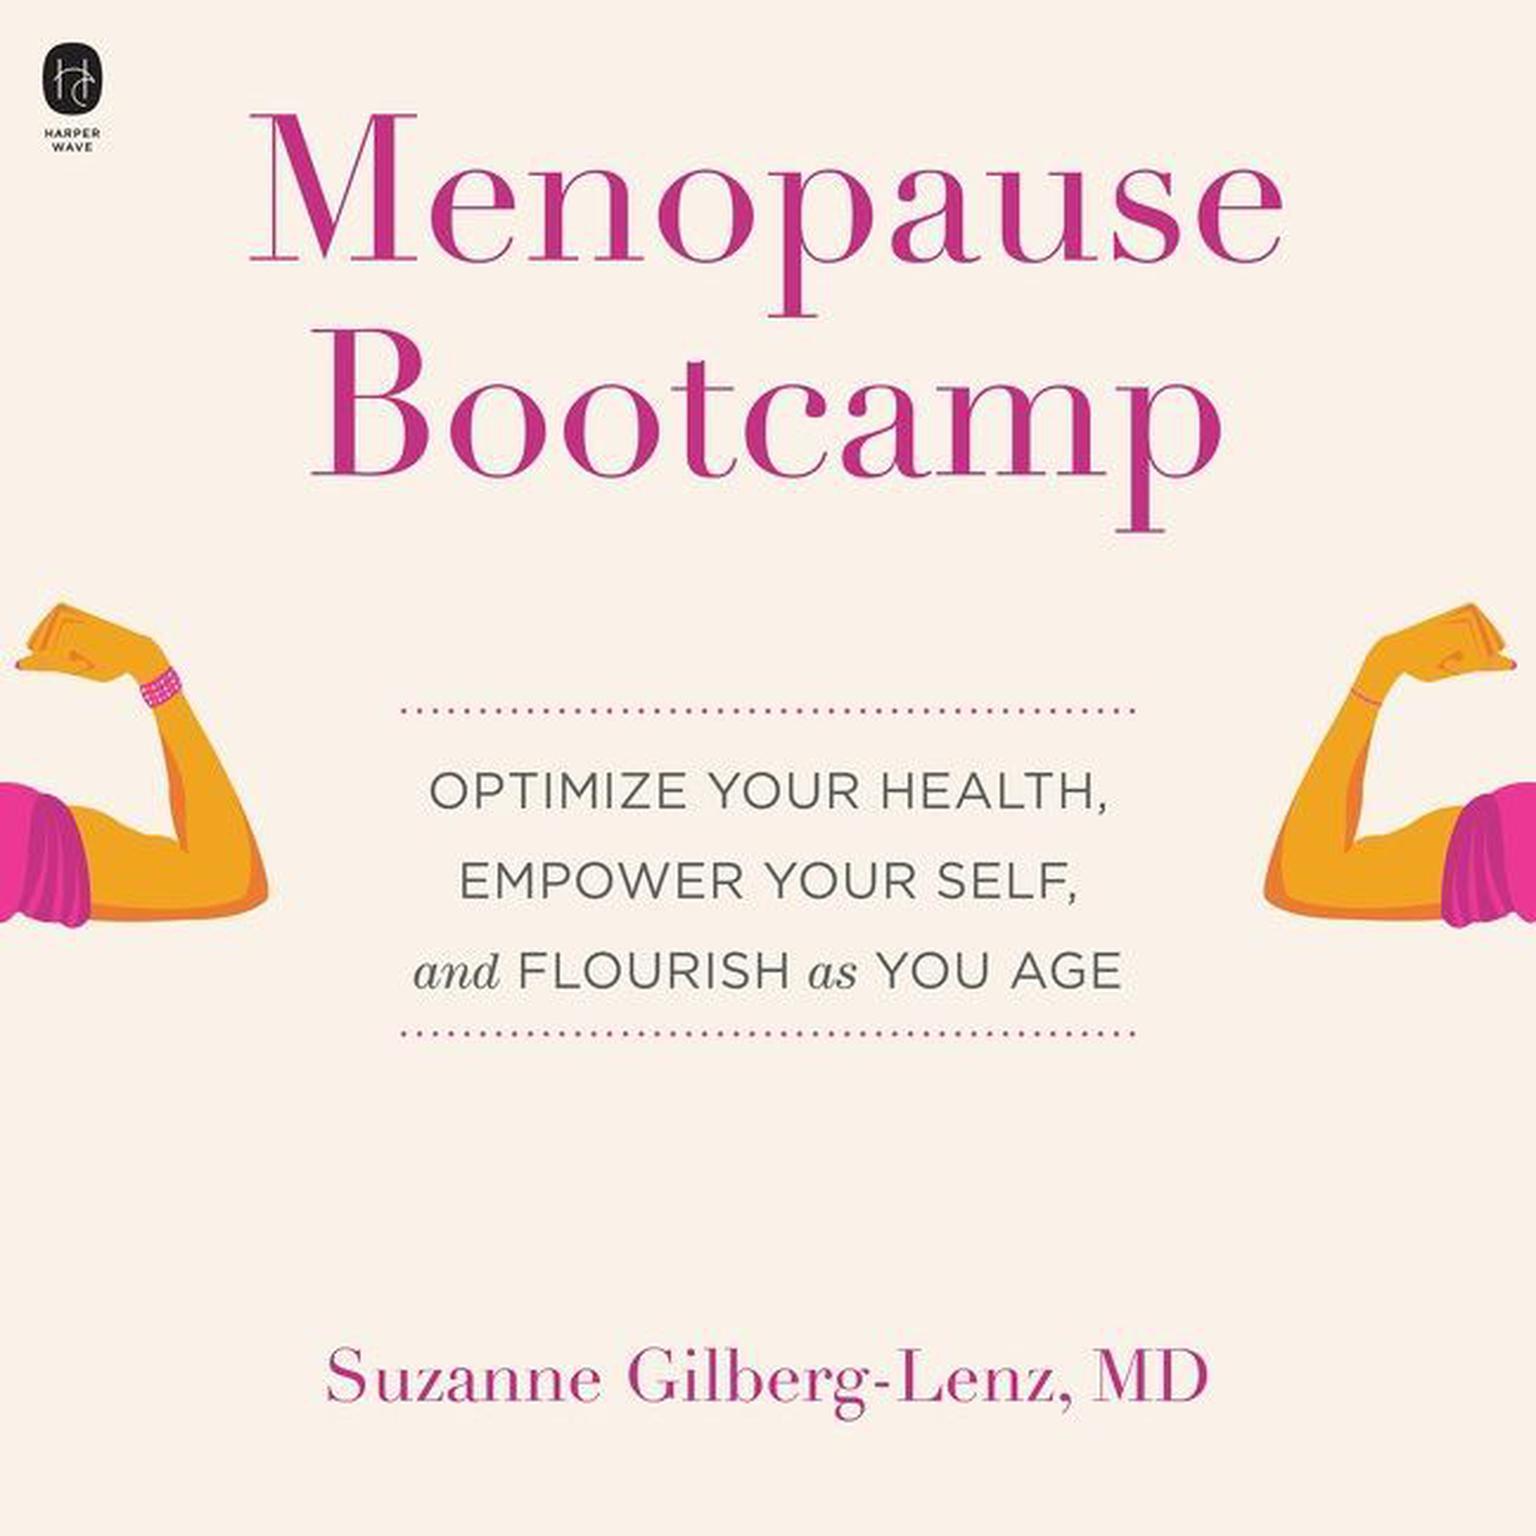 Menopause Bootcamp: Optimize Your Health, Empower Your Self, and Flourish as You Age Audiobook, by Suzanne Gilberg-Lenz